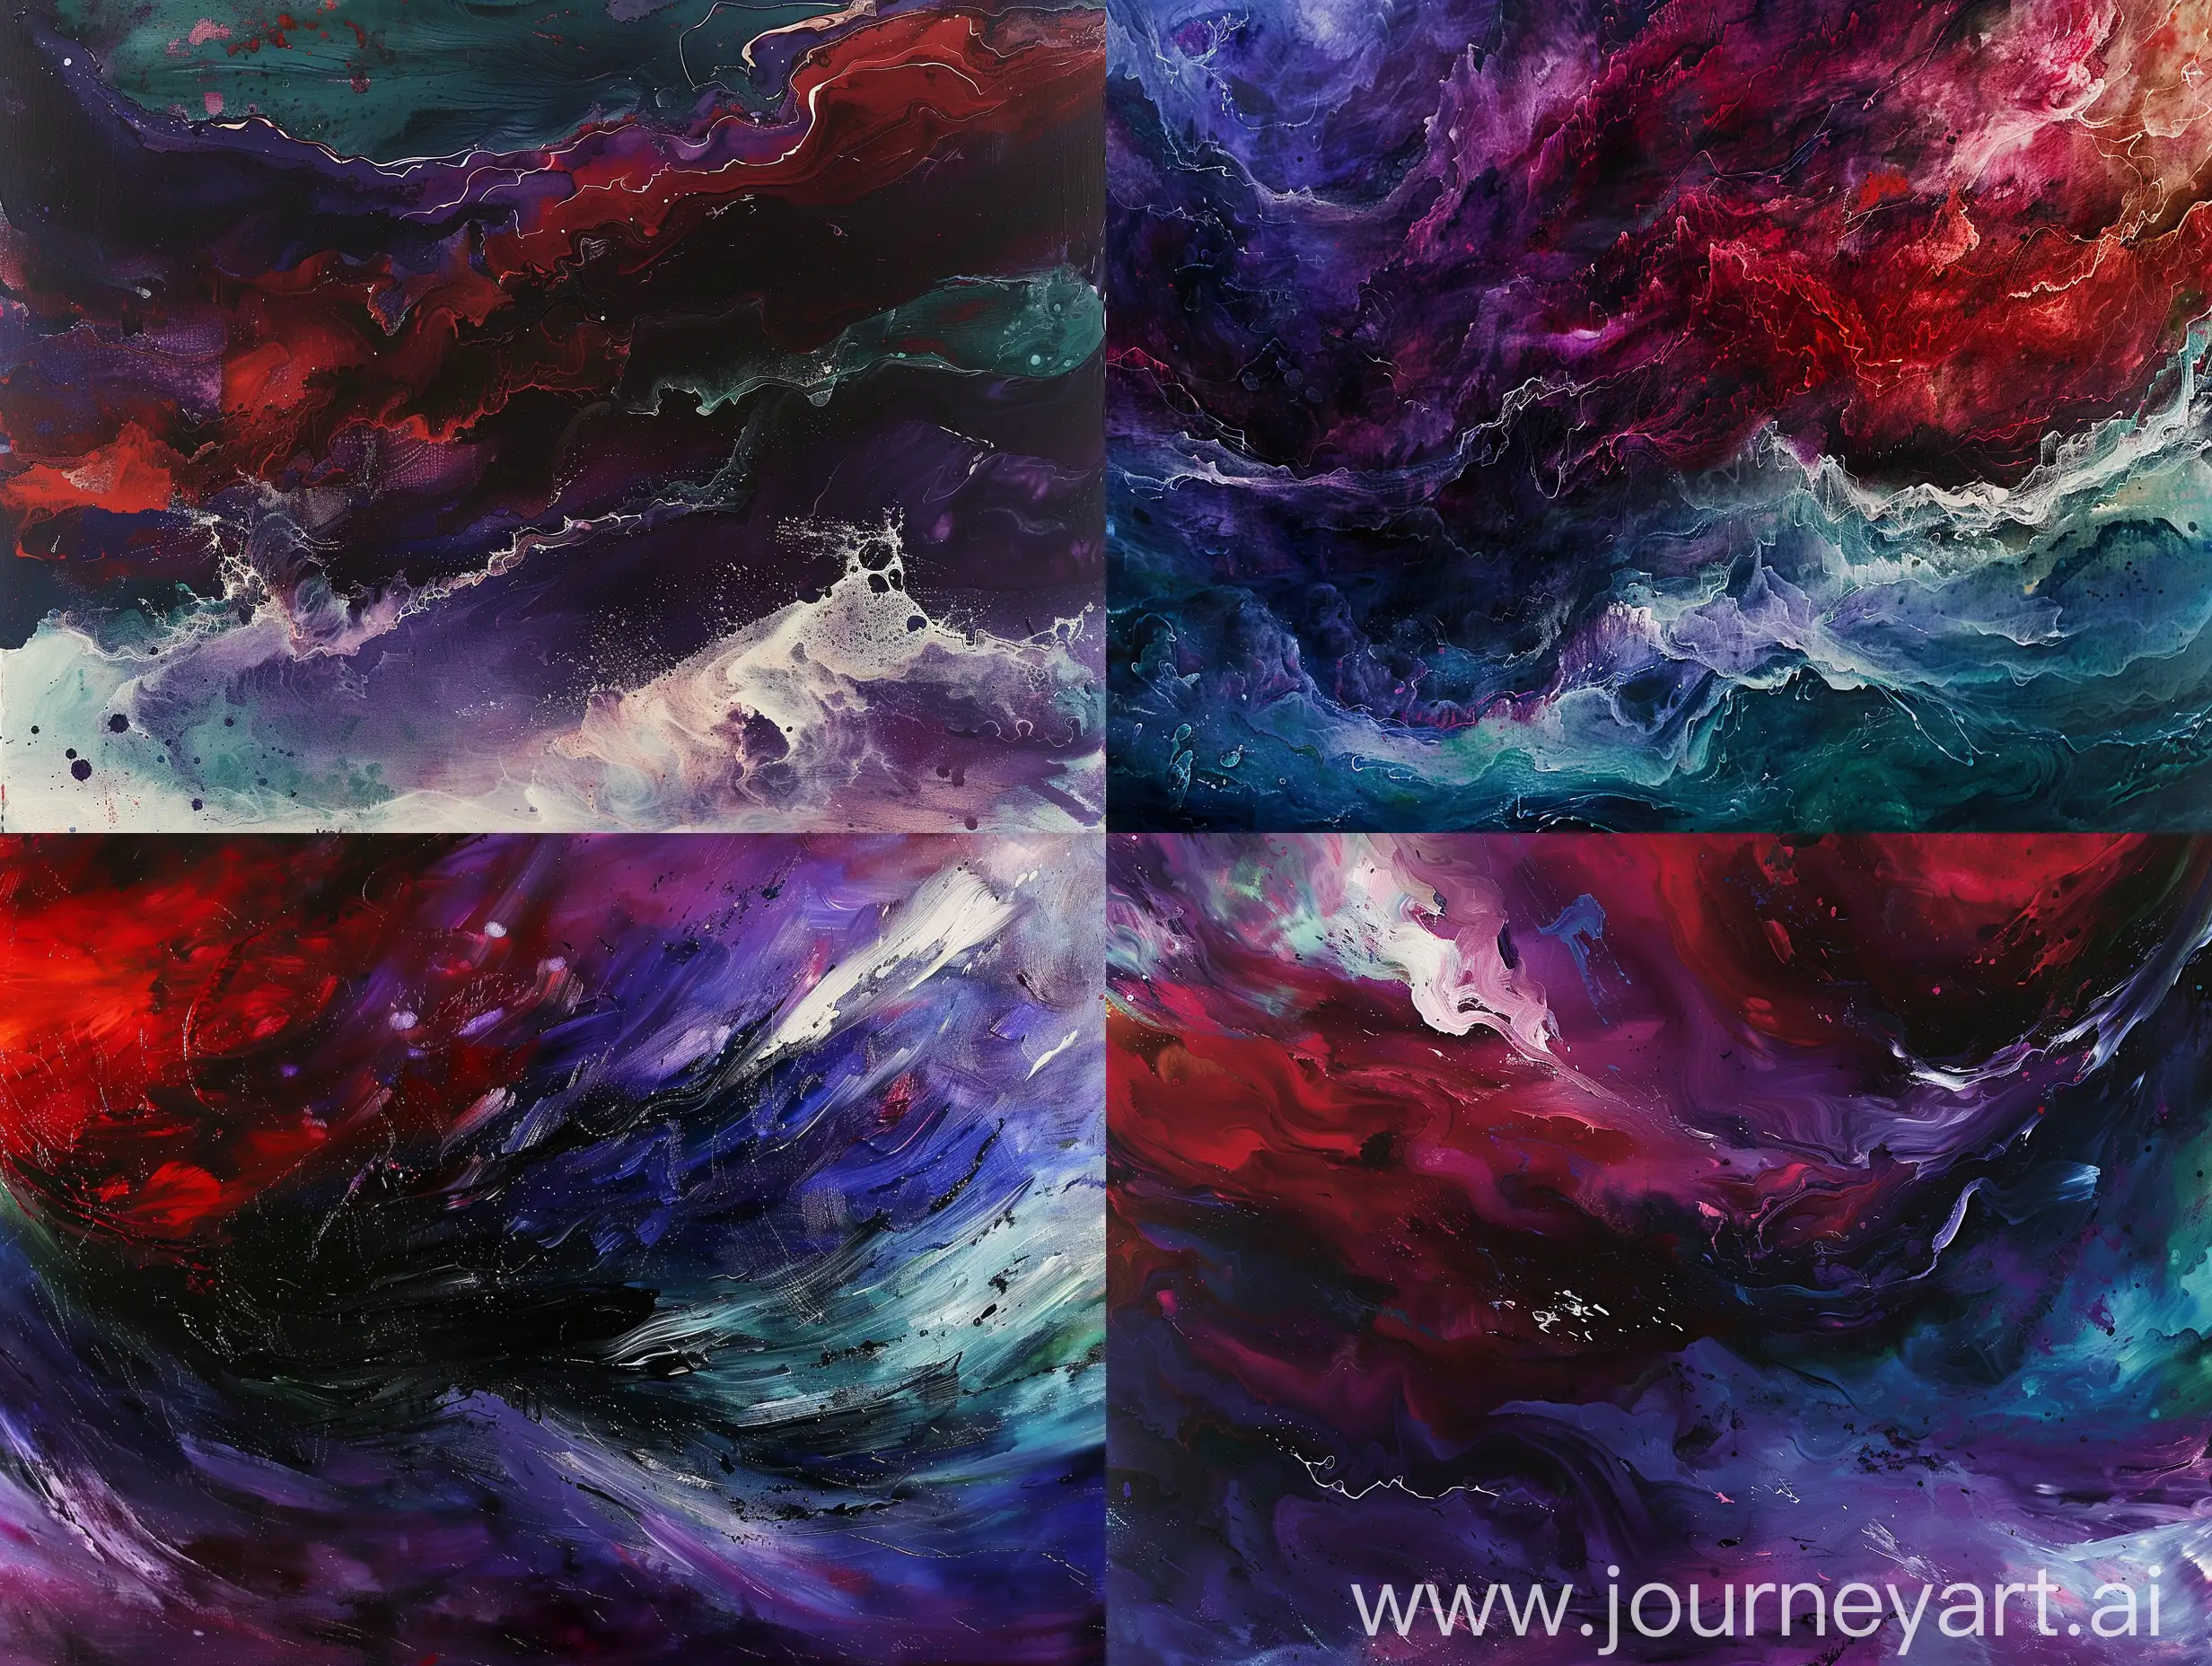 violent deep purples, reds and blues with small traces of greens and whites with blackening edges in a sweeping and swirling wash of an ocean of angry colours. To represent a form of beautiful despair